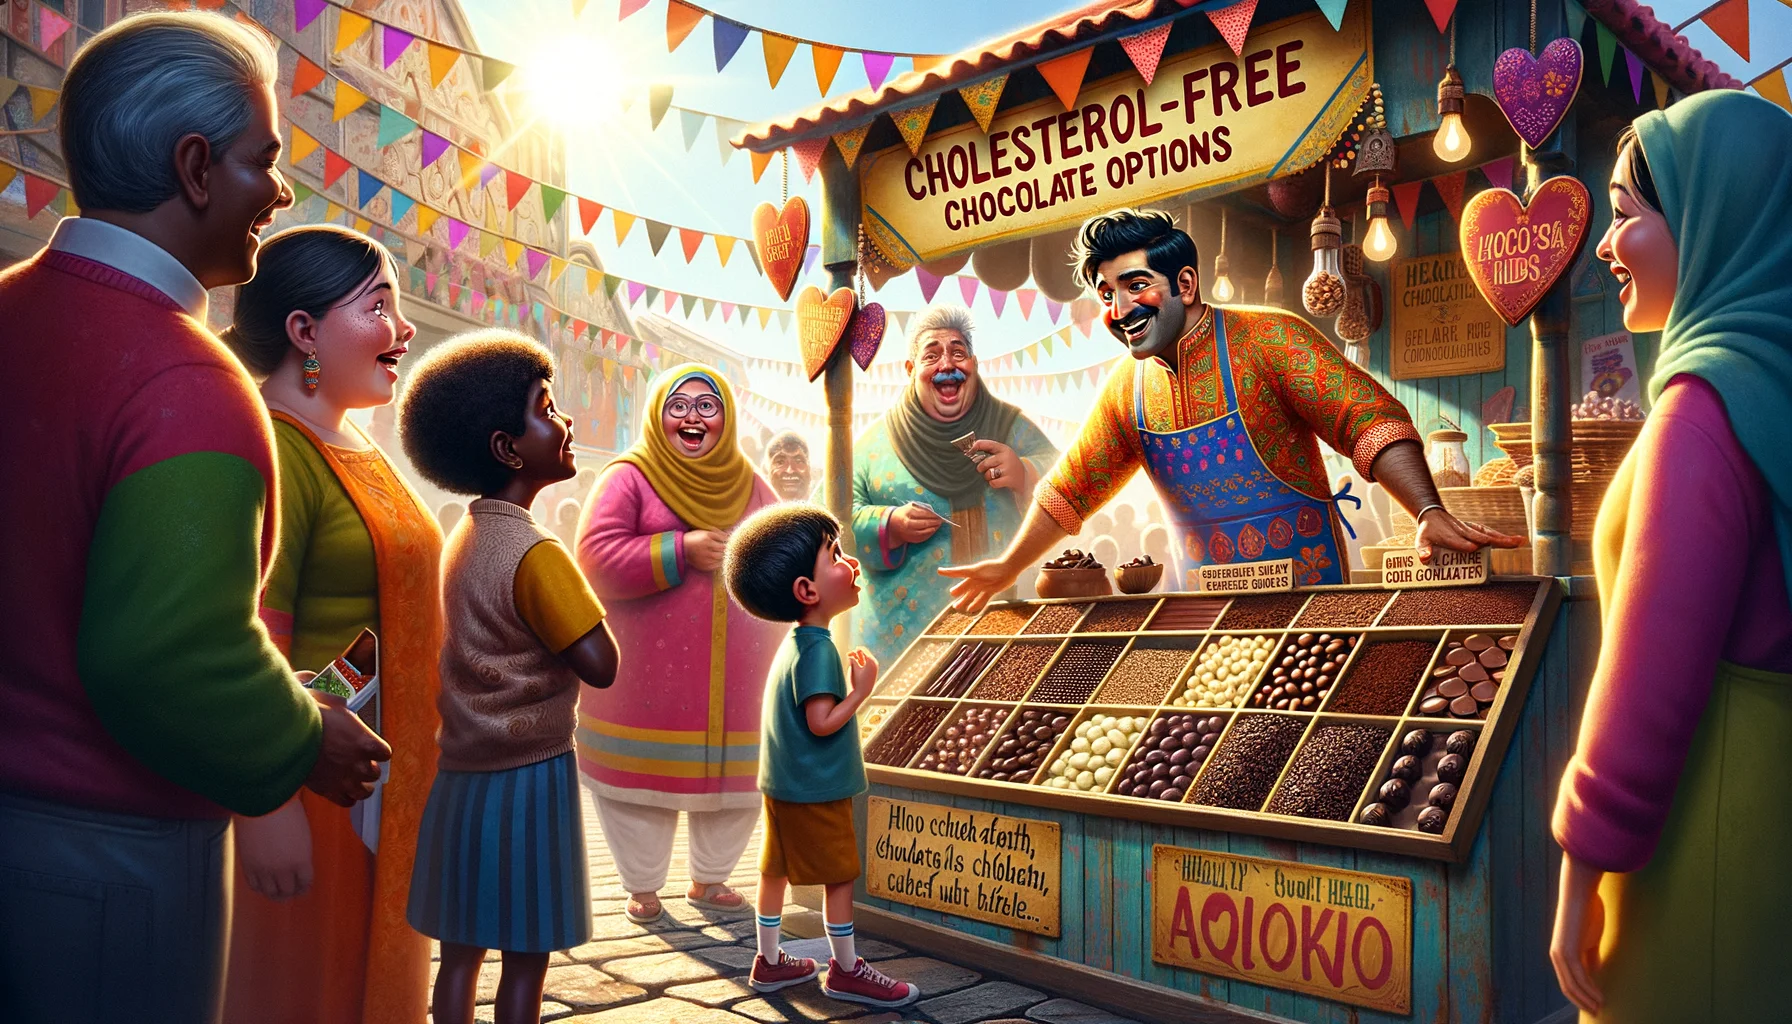 Let's imagine a whimsical scene located at a vibrant market street. Vendors are luring customers with exciting shouts. One stall stands out, featuring the words 'Cholesterol-Free Chocolate Options'. This stall is run by a joyous, South Asian man wearing a vibrant apron. He slyly shuffles a variety of dark chocolates, cocoa nibs, and healthy nut-based chocolates through his hands. A curious pair of children - a Caucasian girl and a Hispanic boy, stare at the display, eyes wide and mouths agape. Behind them, a white woman and a black man chuckled, amused at the children's reactions. The bright sun above casts warm light across the scene.